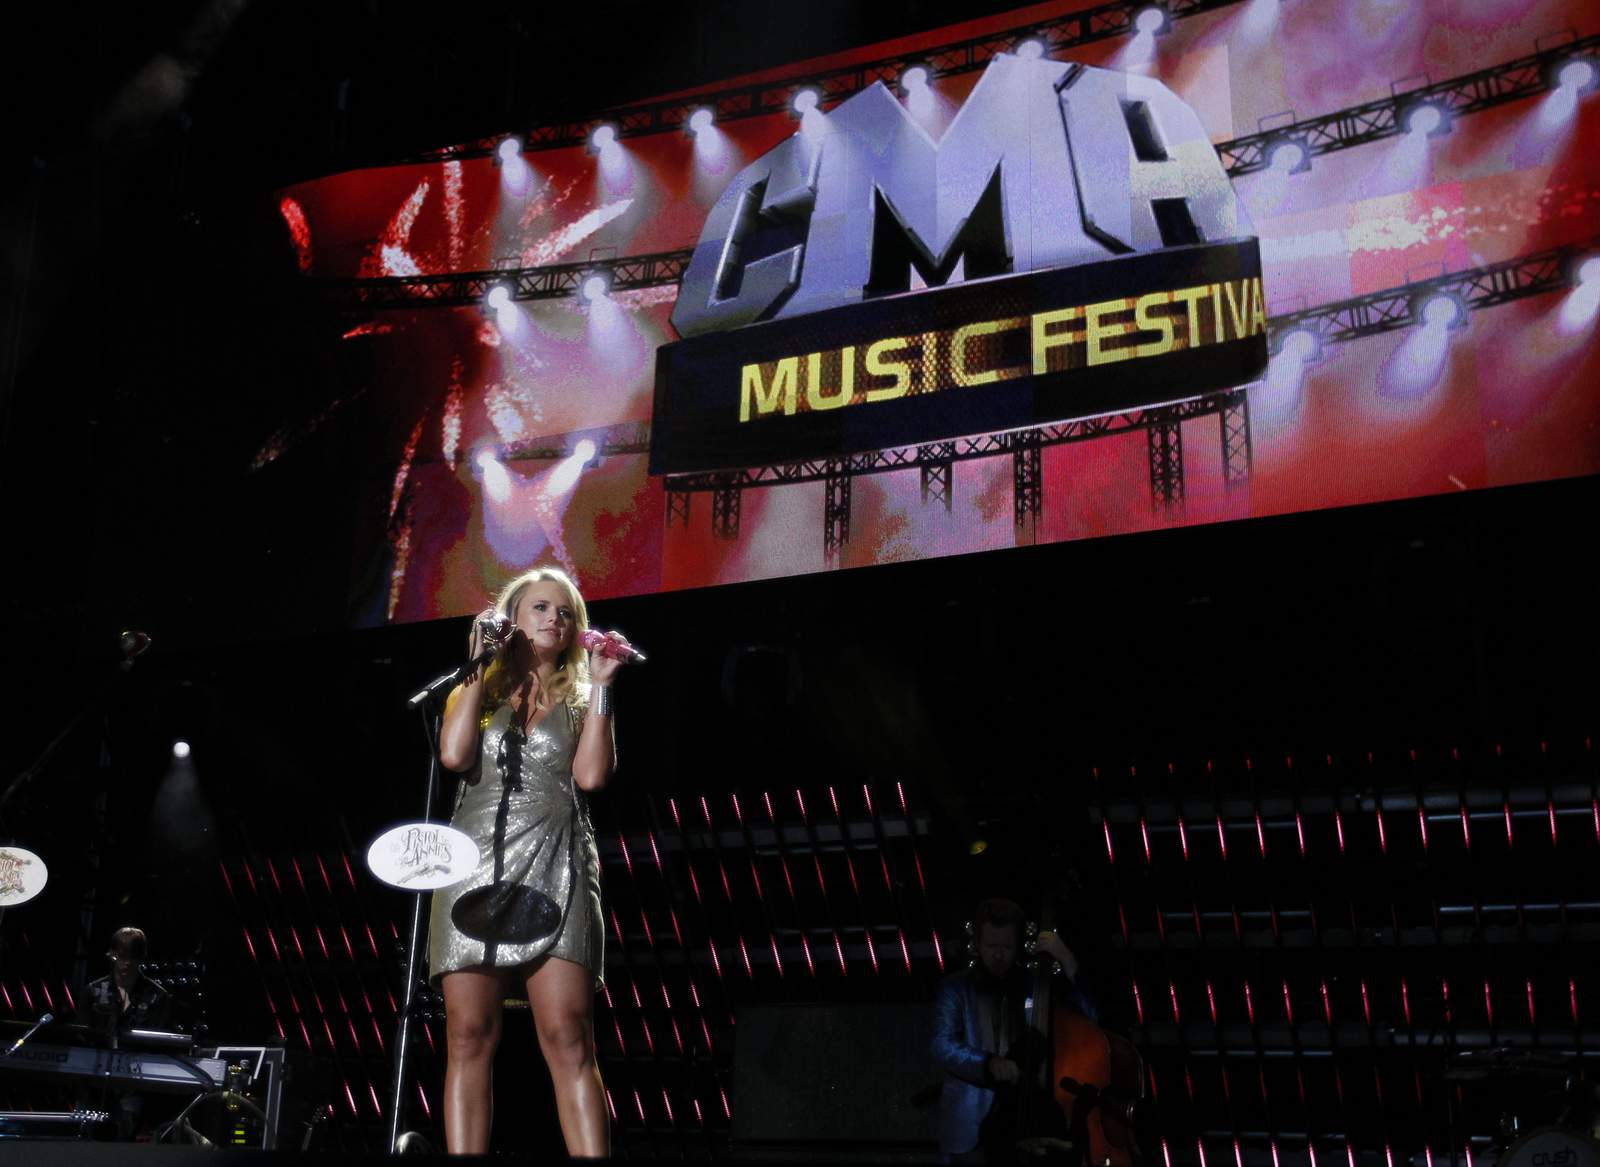 CMA Fest canceled for 2nd year in a row due to COVID-19